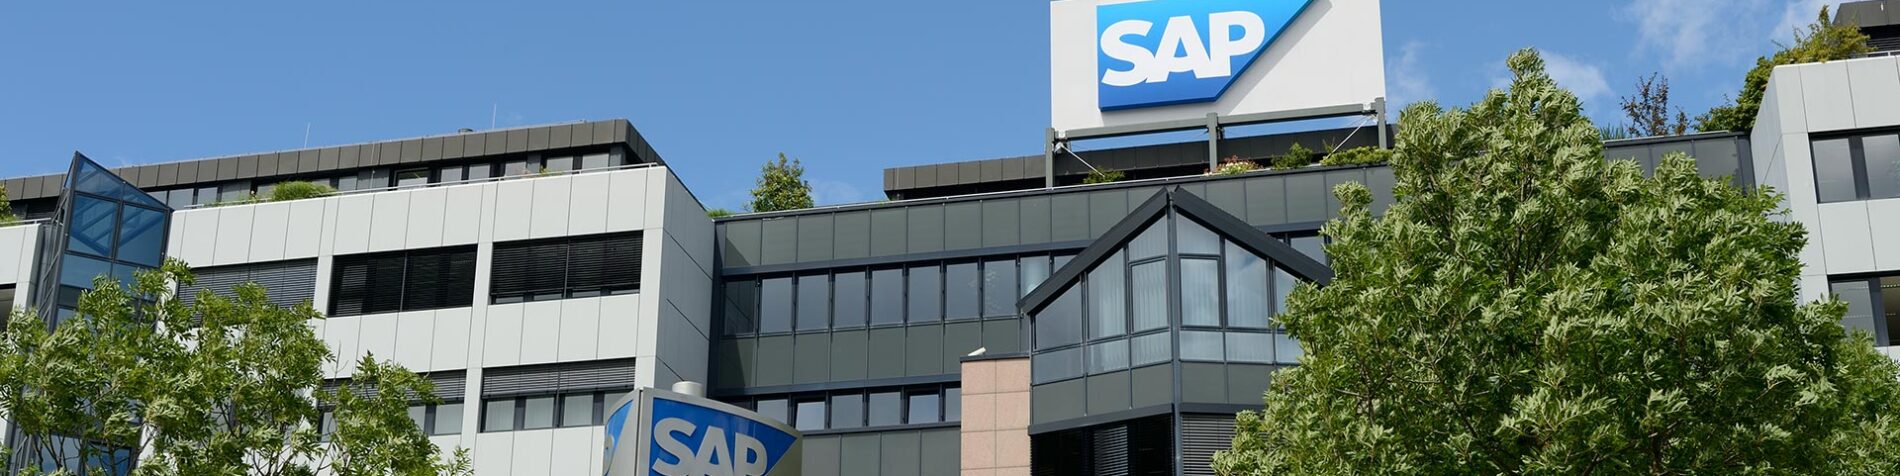 SAP Accelerates More Than 1,000 Startups Globally, Introduces “Powered by SAP HANA” Certification Initiative